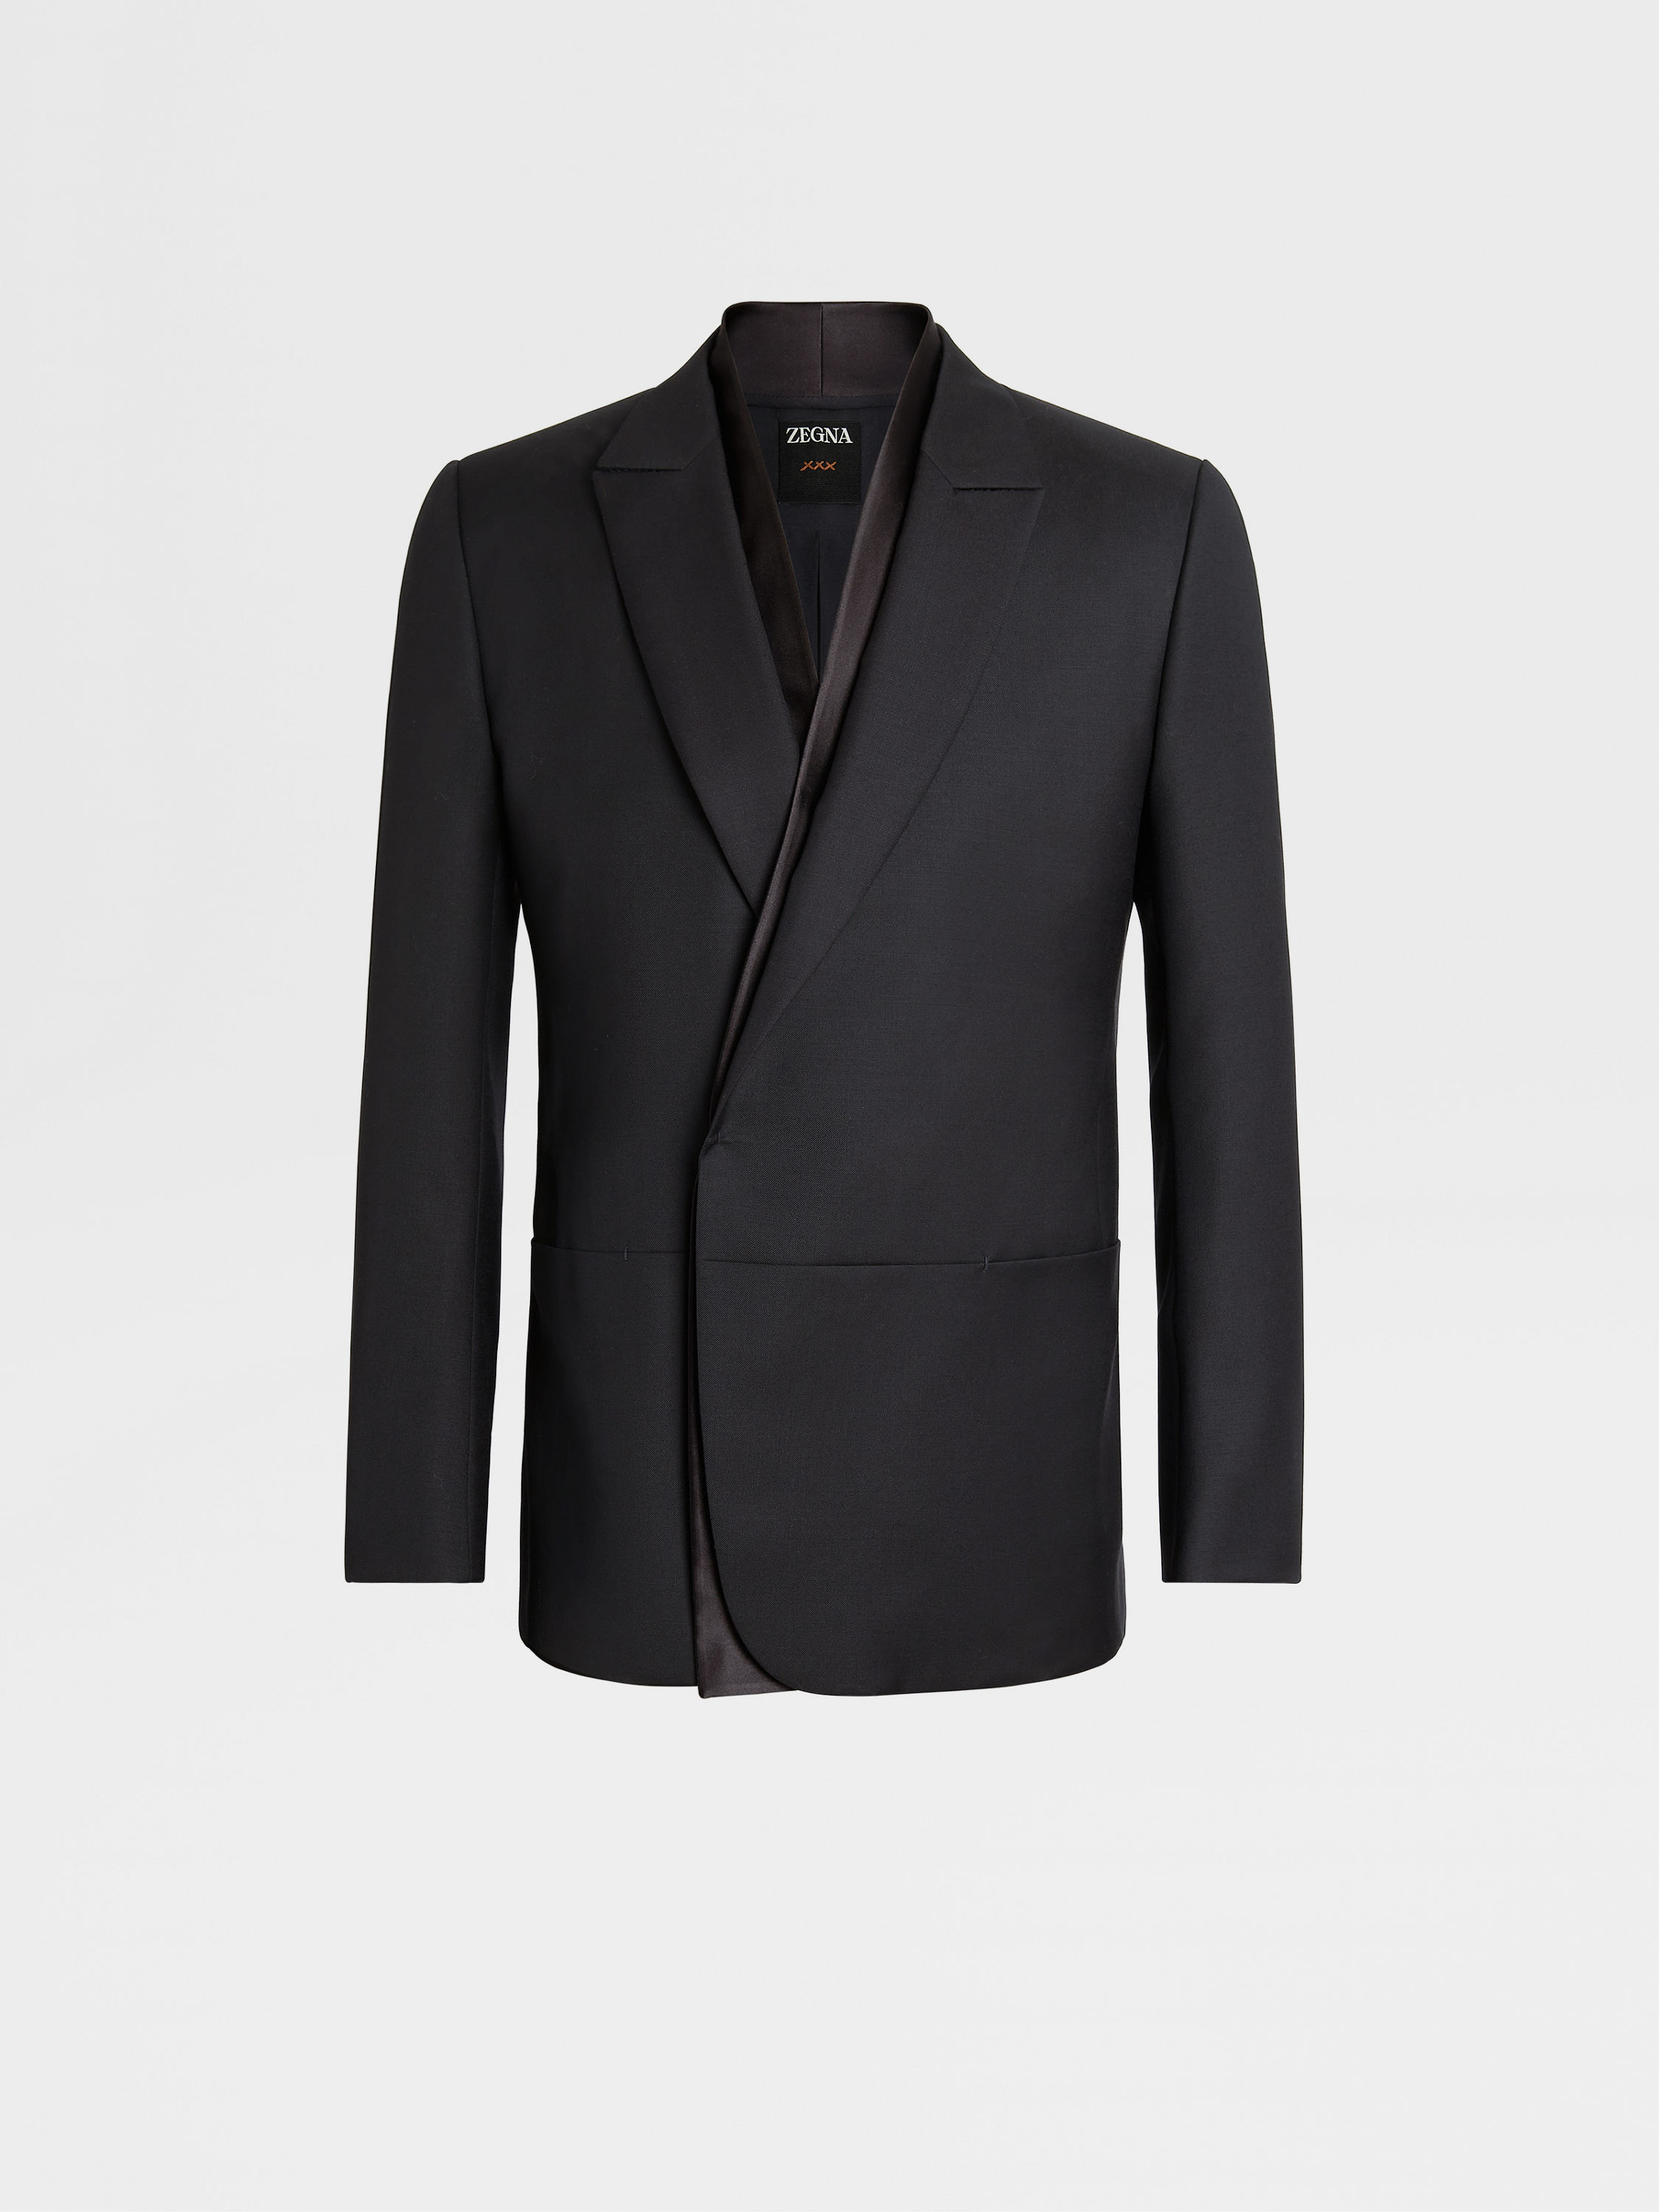 Black Wool and Mohair Evening Jacket